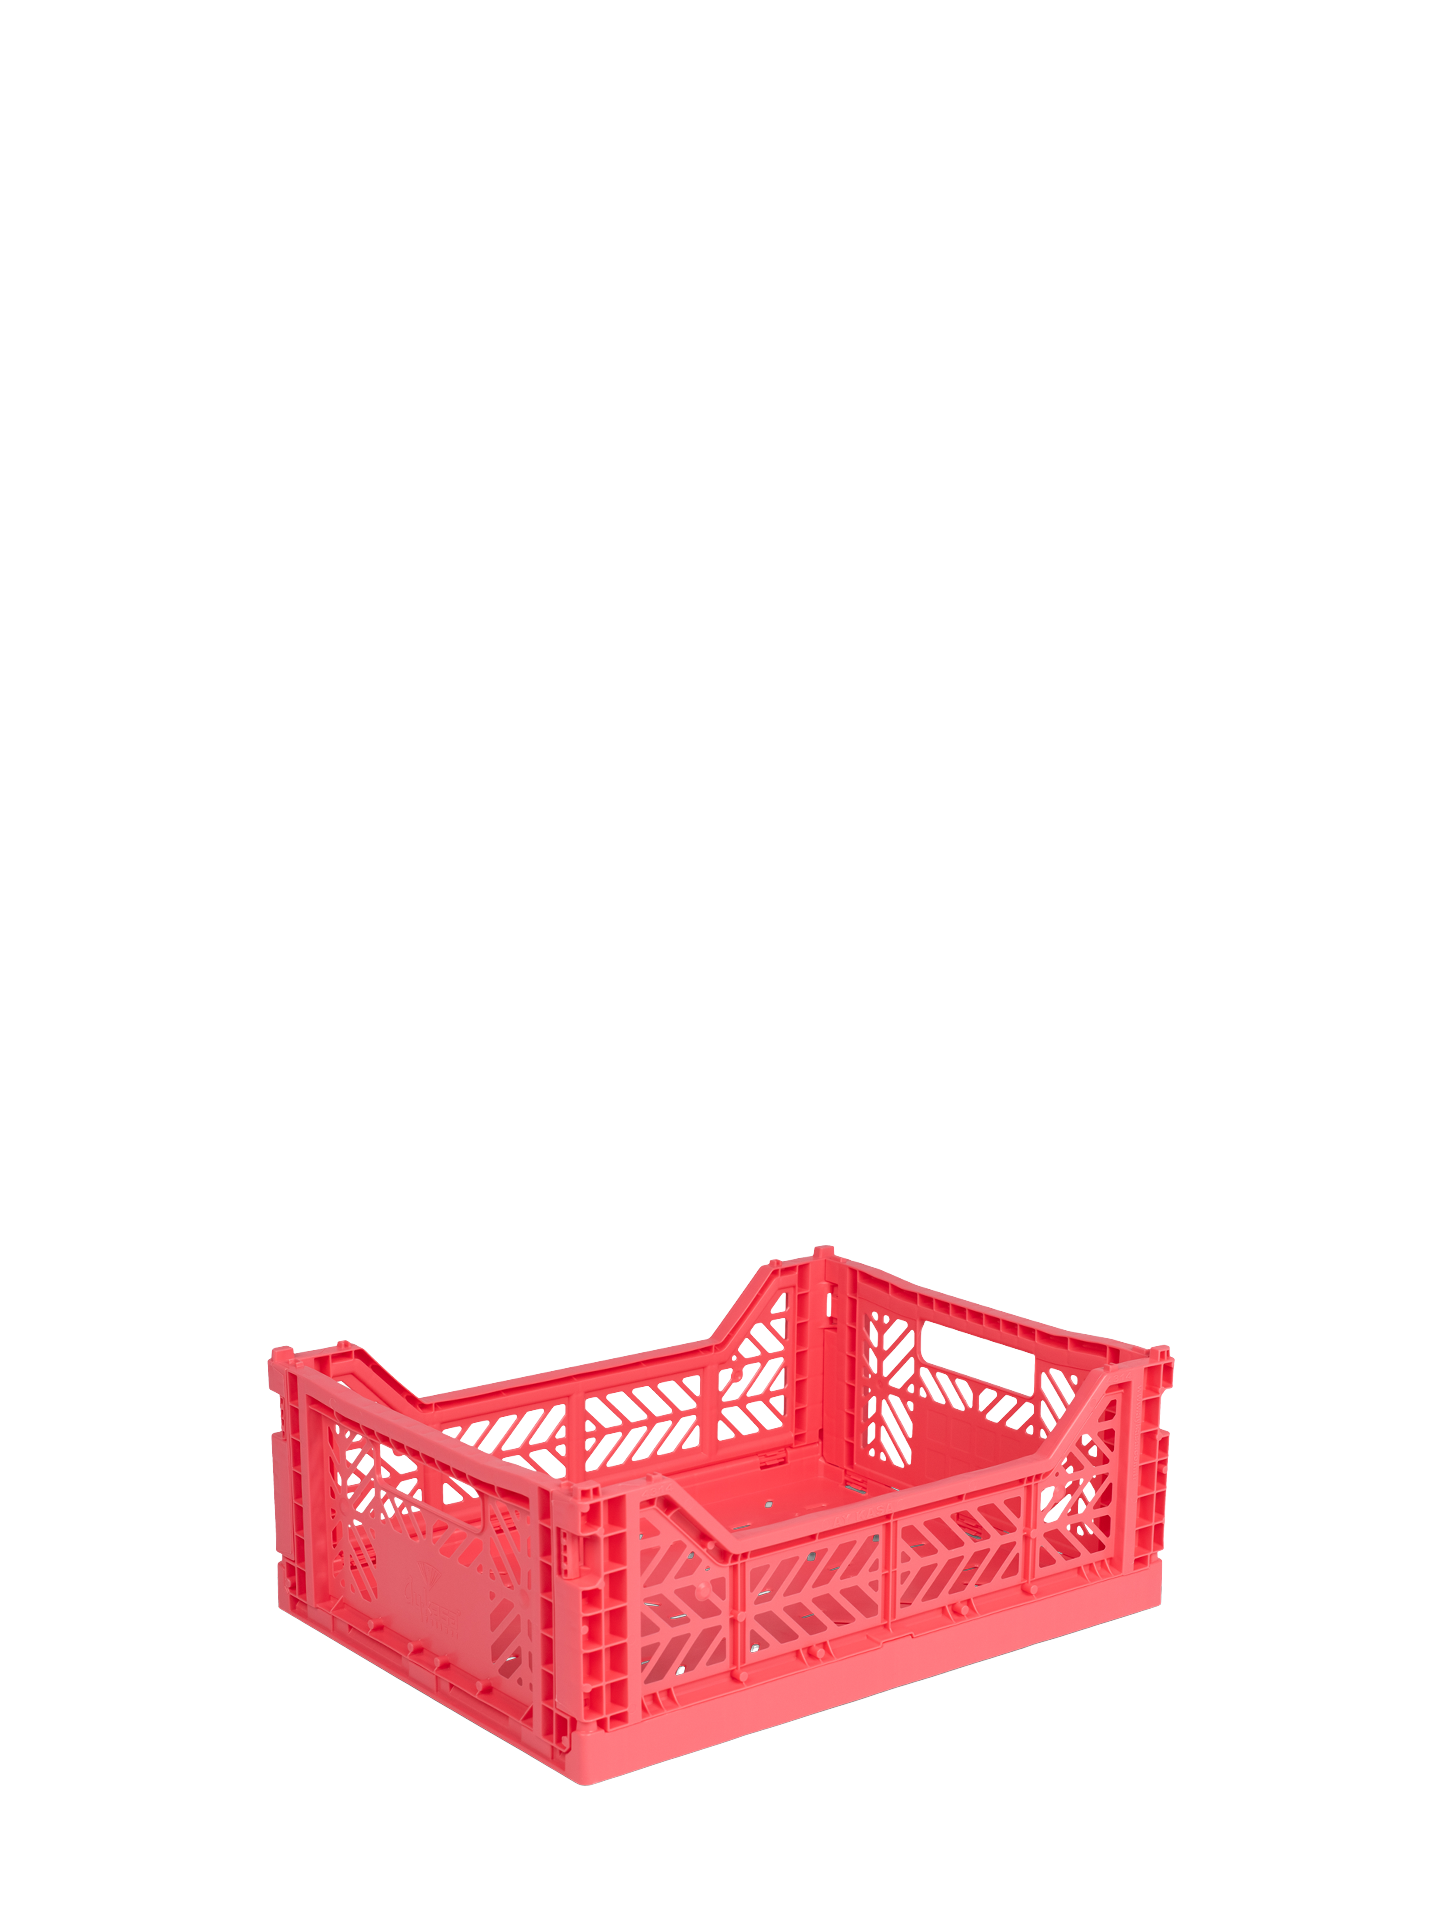 Easy to fold when not in use, the Aykasa medium size plastic storage crate in Dark pink can be stacked on top of each other and the colour range has a perfect hue for any room.